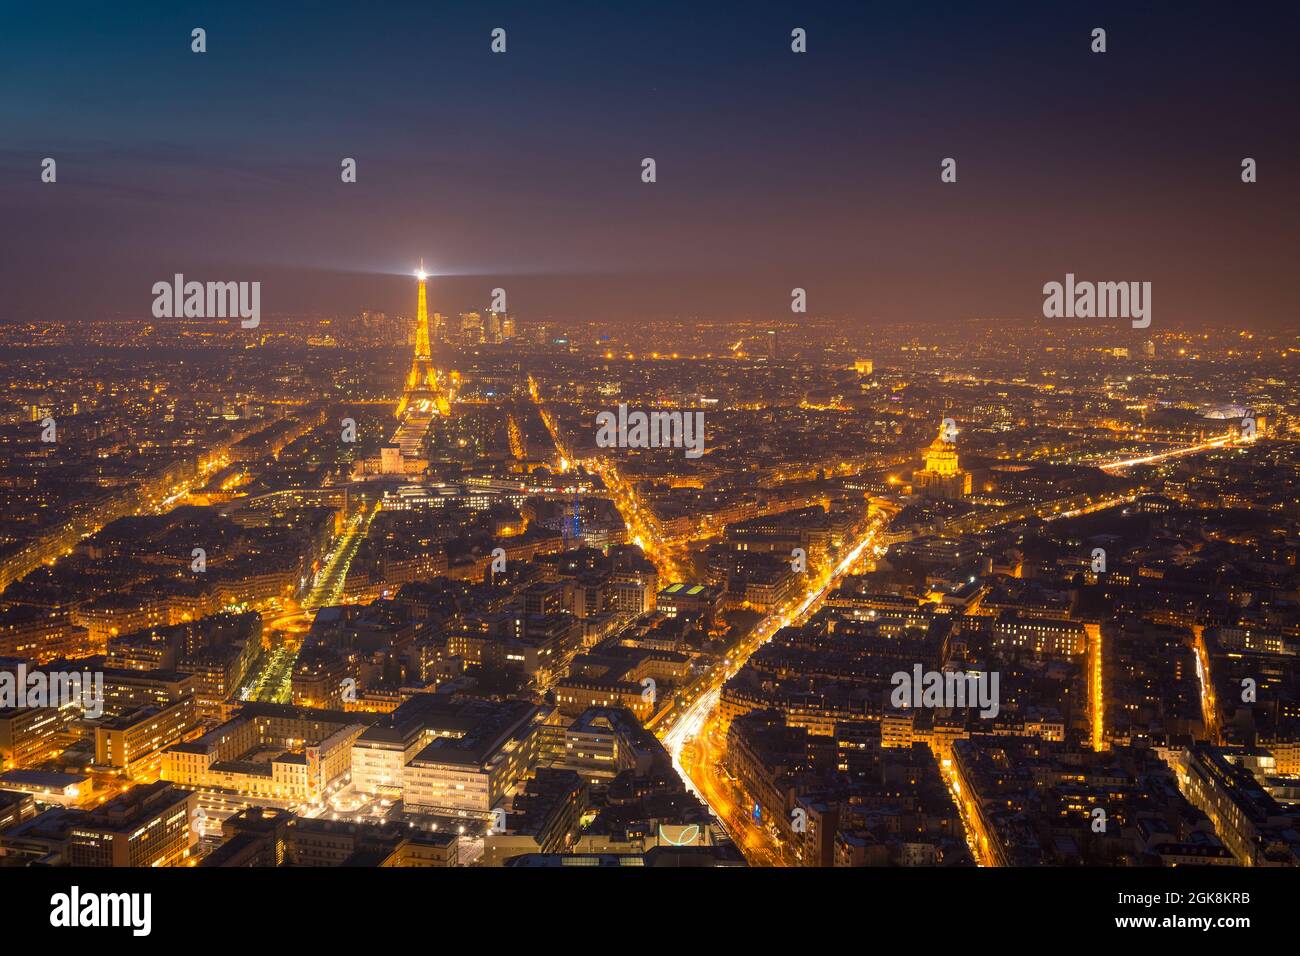 Aerial view of dark night sky above illuminated buildings and roads with high Eiffel Tower in district of Paris Stock Photo